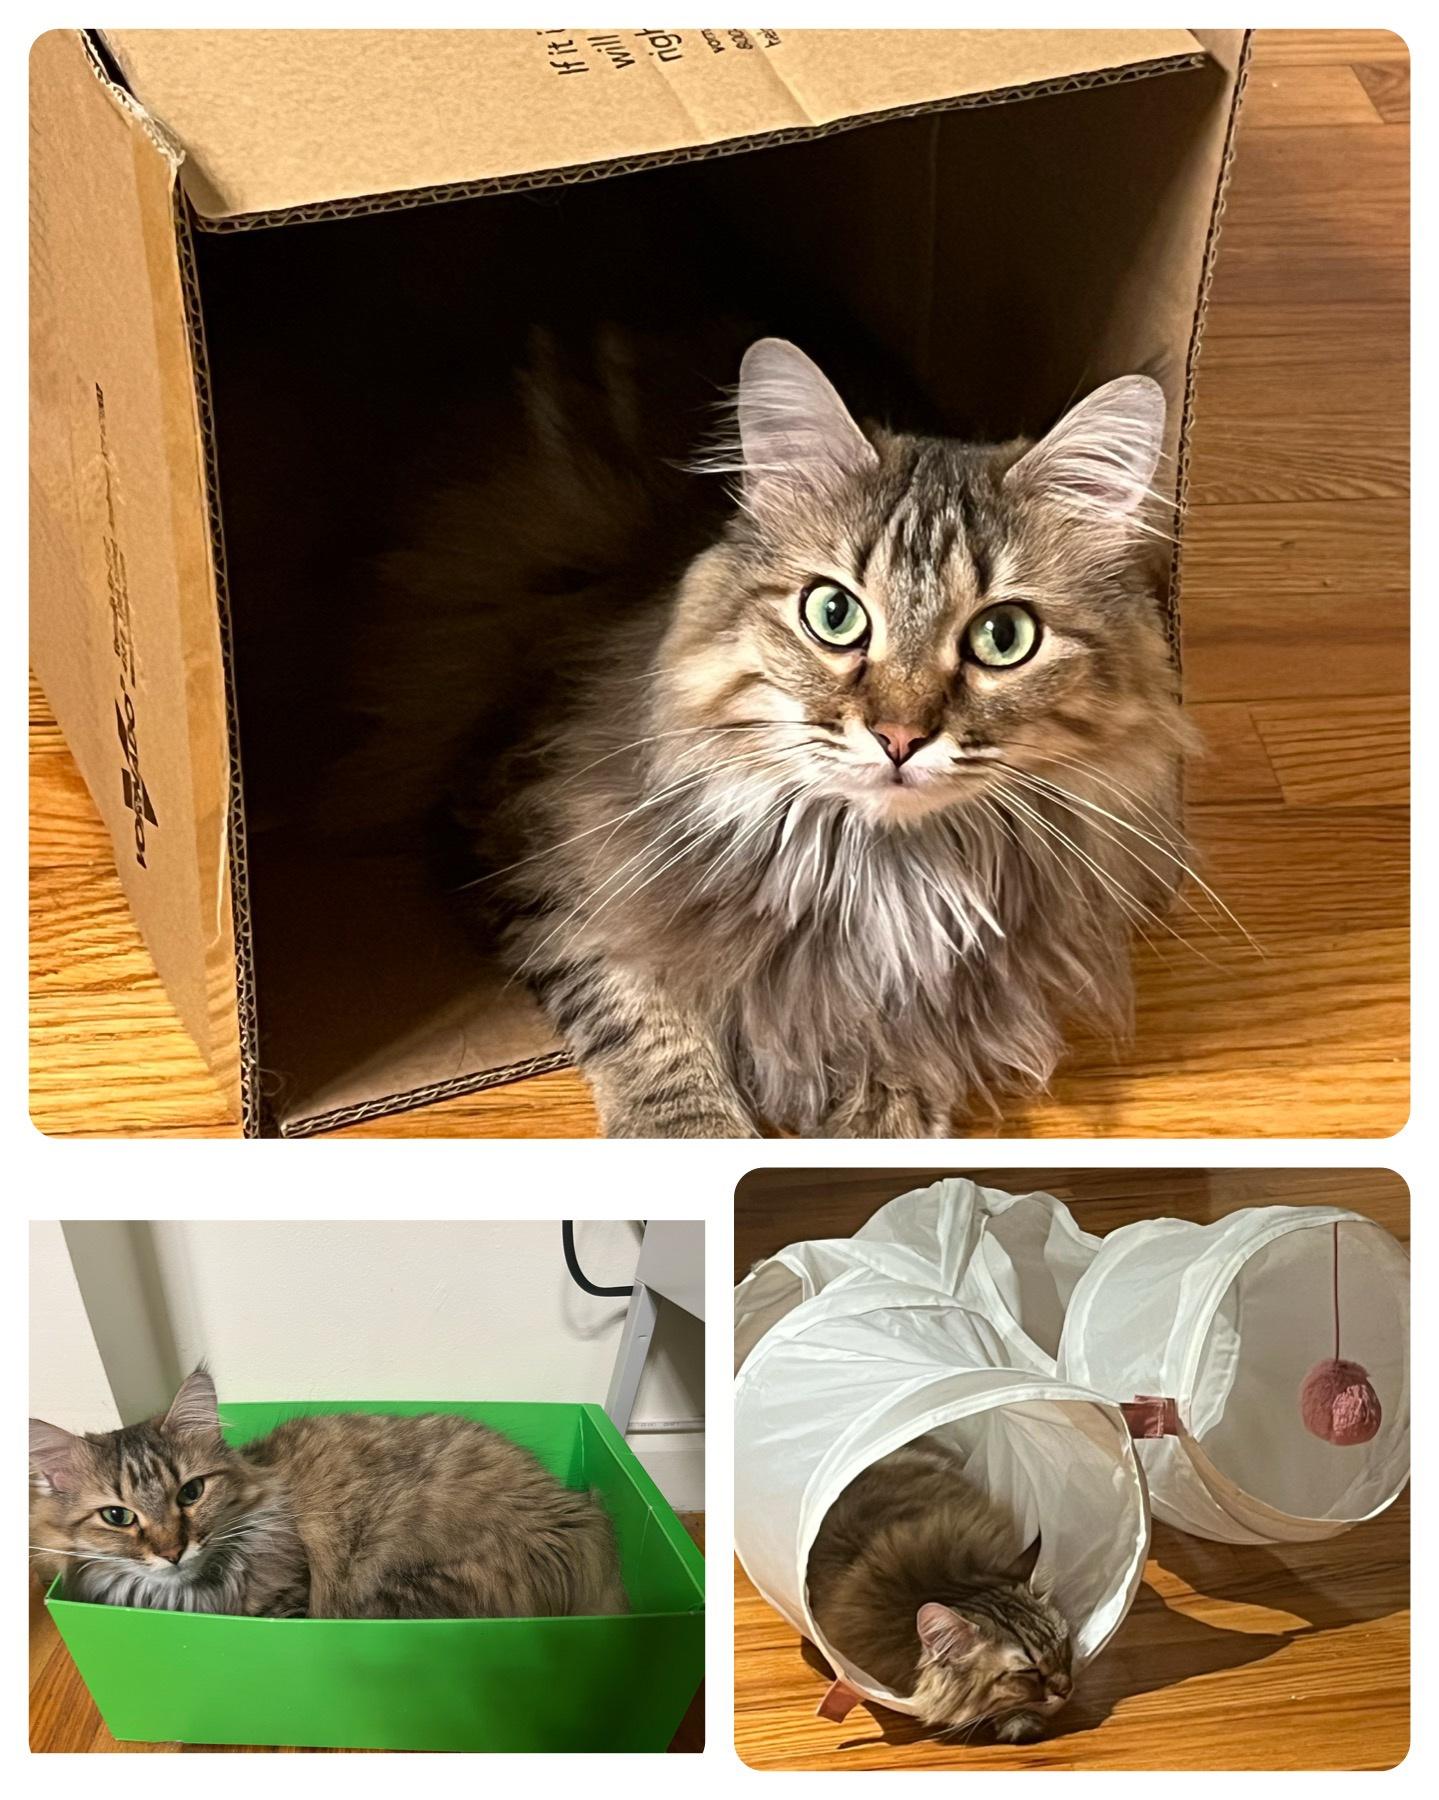 Eleanor, the trash kitty: I capture her toys and cat tree nonetheless prefers containers.